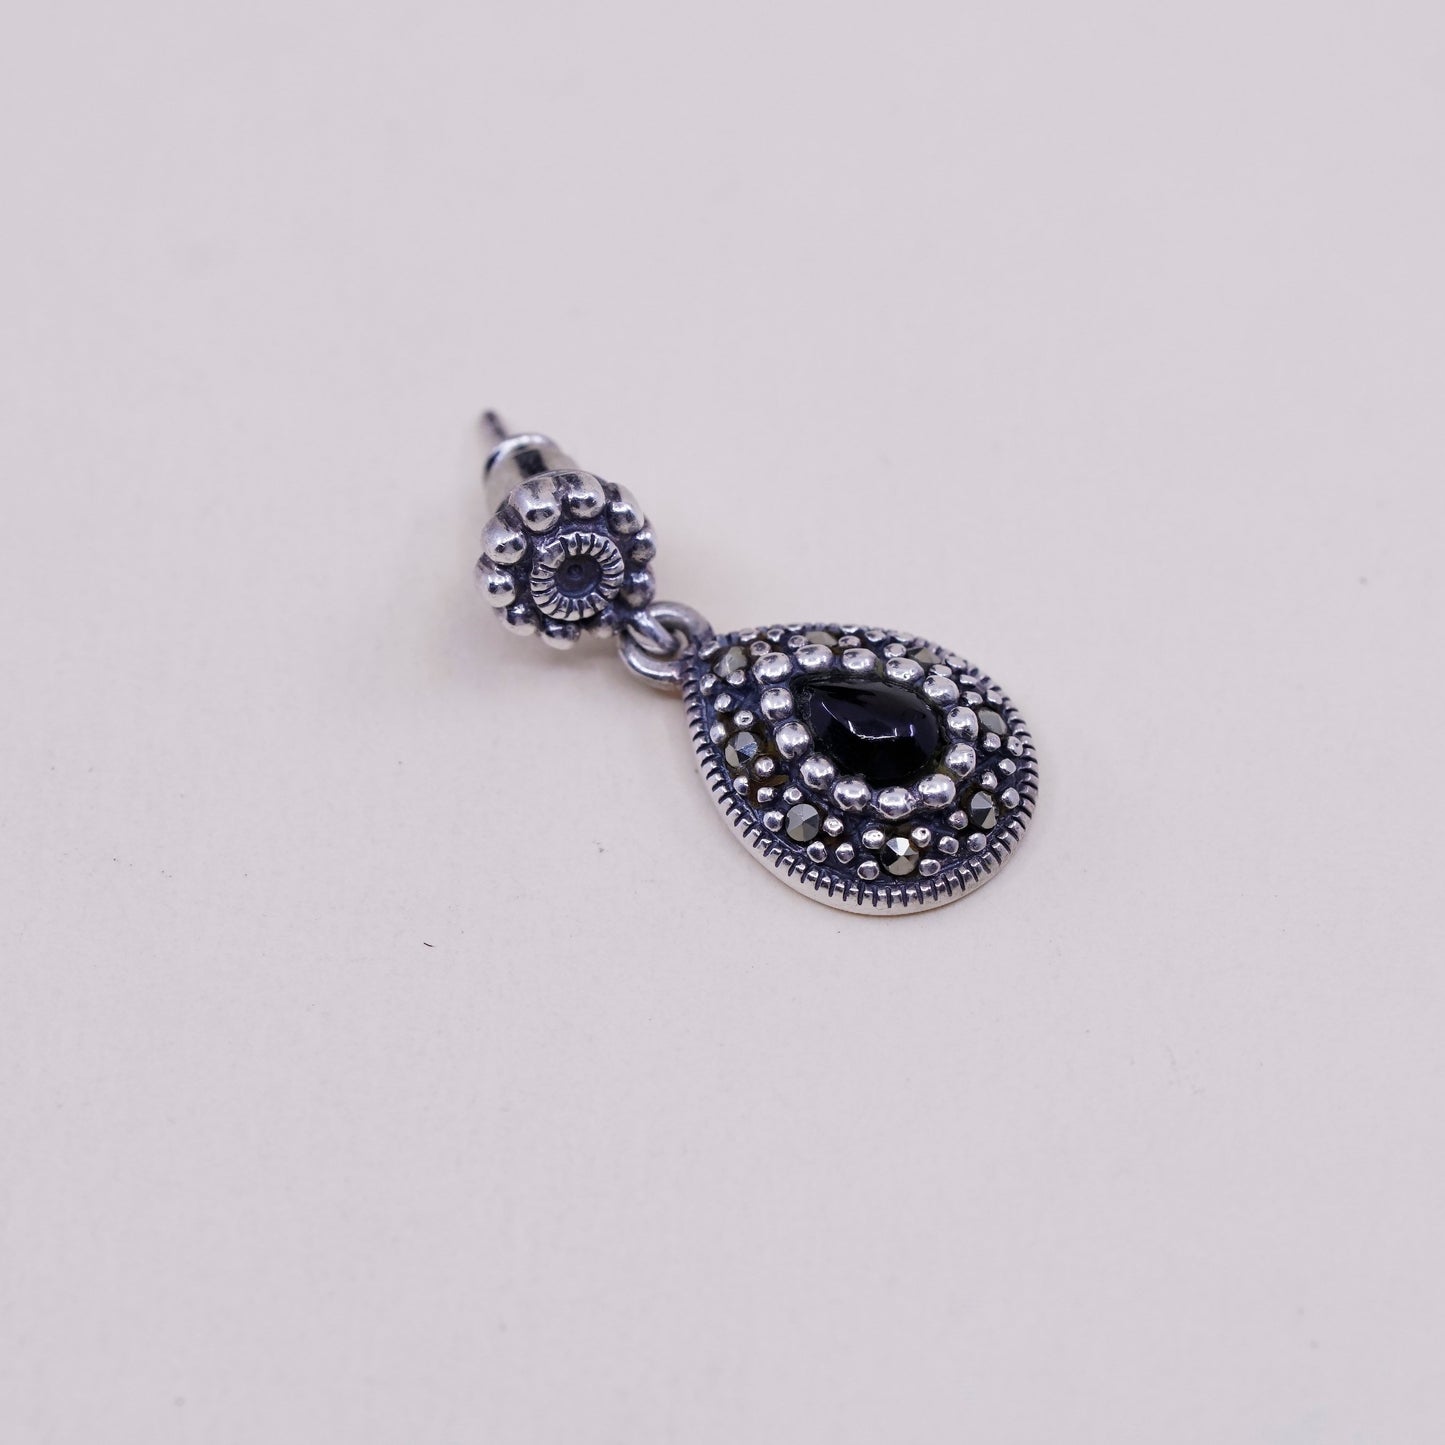 Vintage Sterling silver handmade earrings, 925 drops w/ obsidian and marcasite